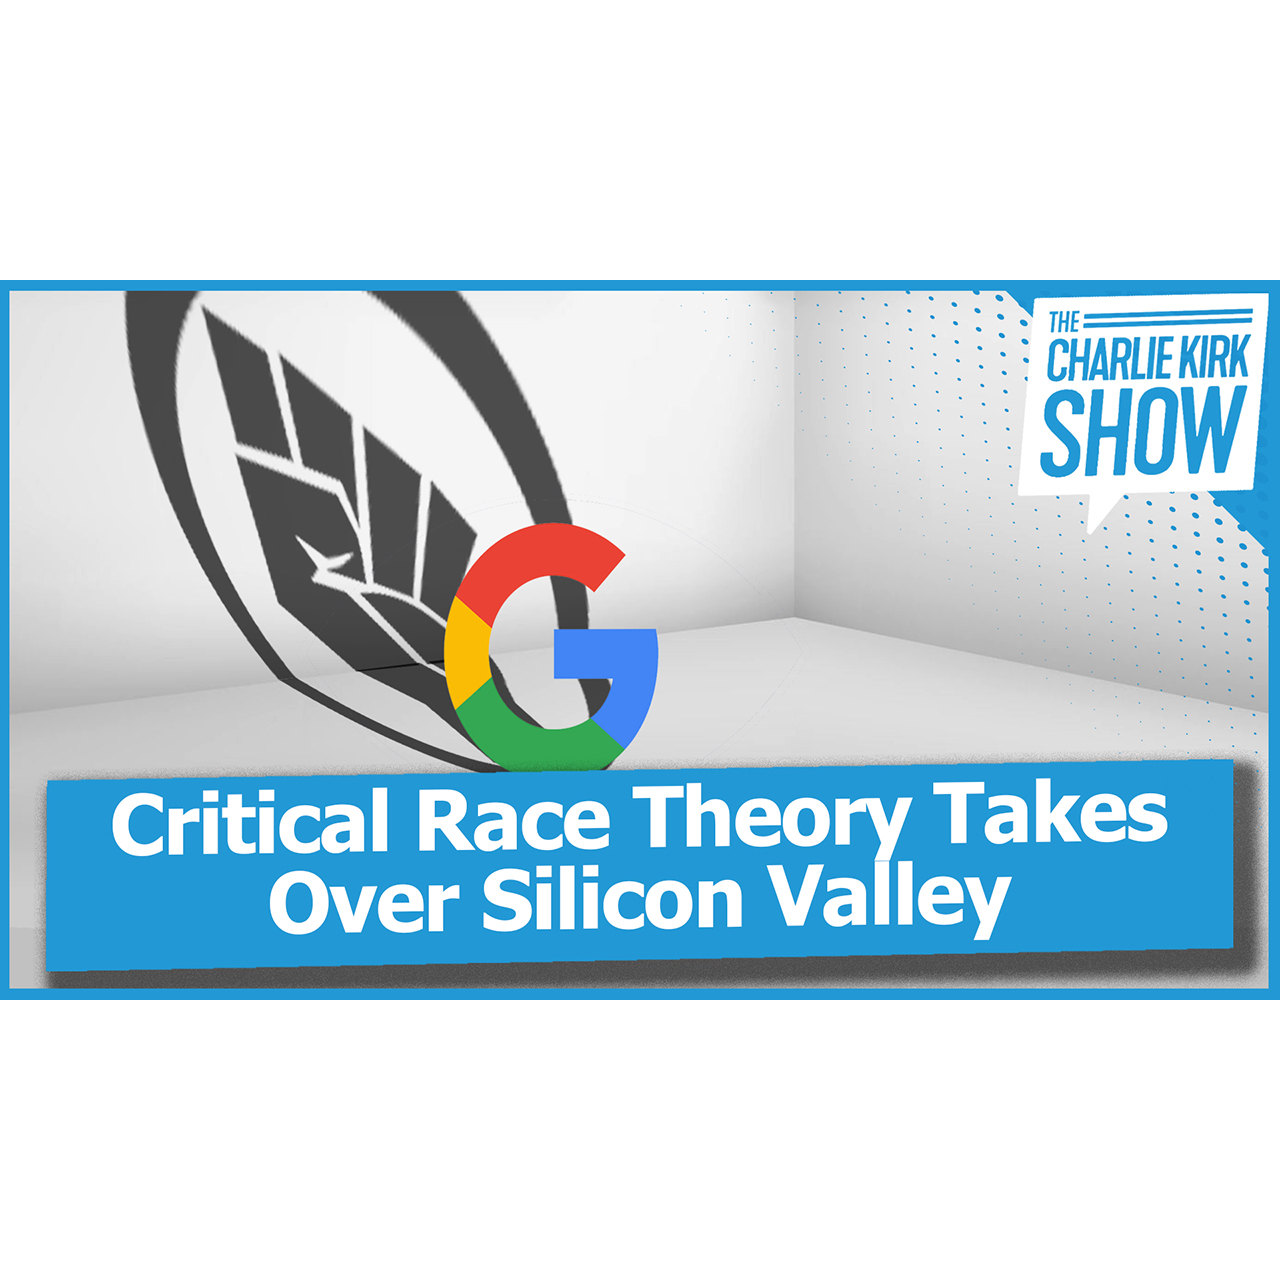 Critical Race Theory Takes Over Silicon Valley